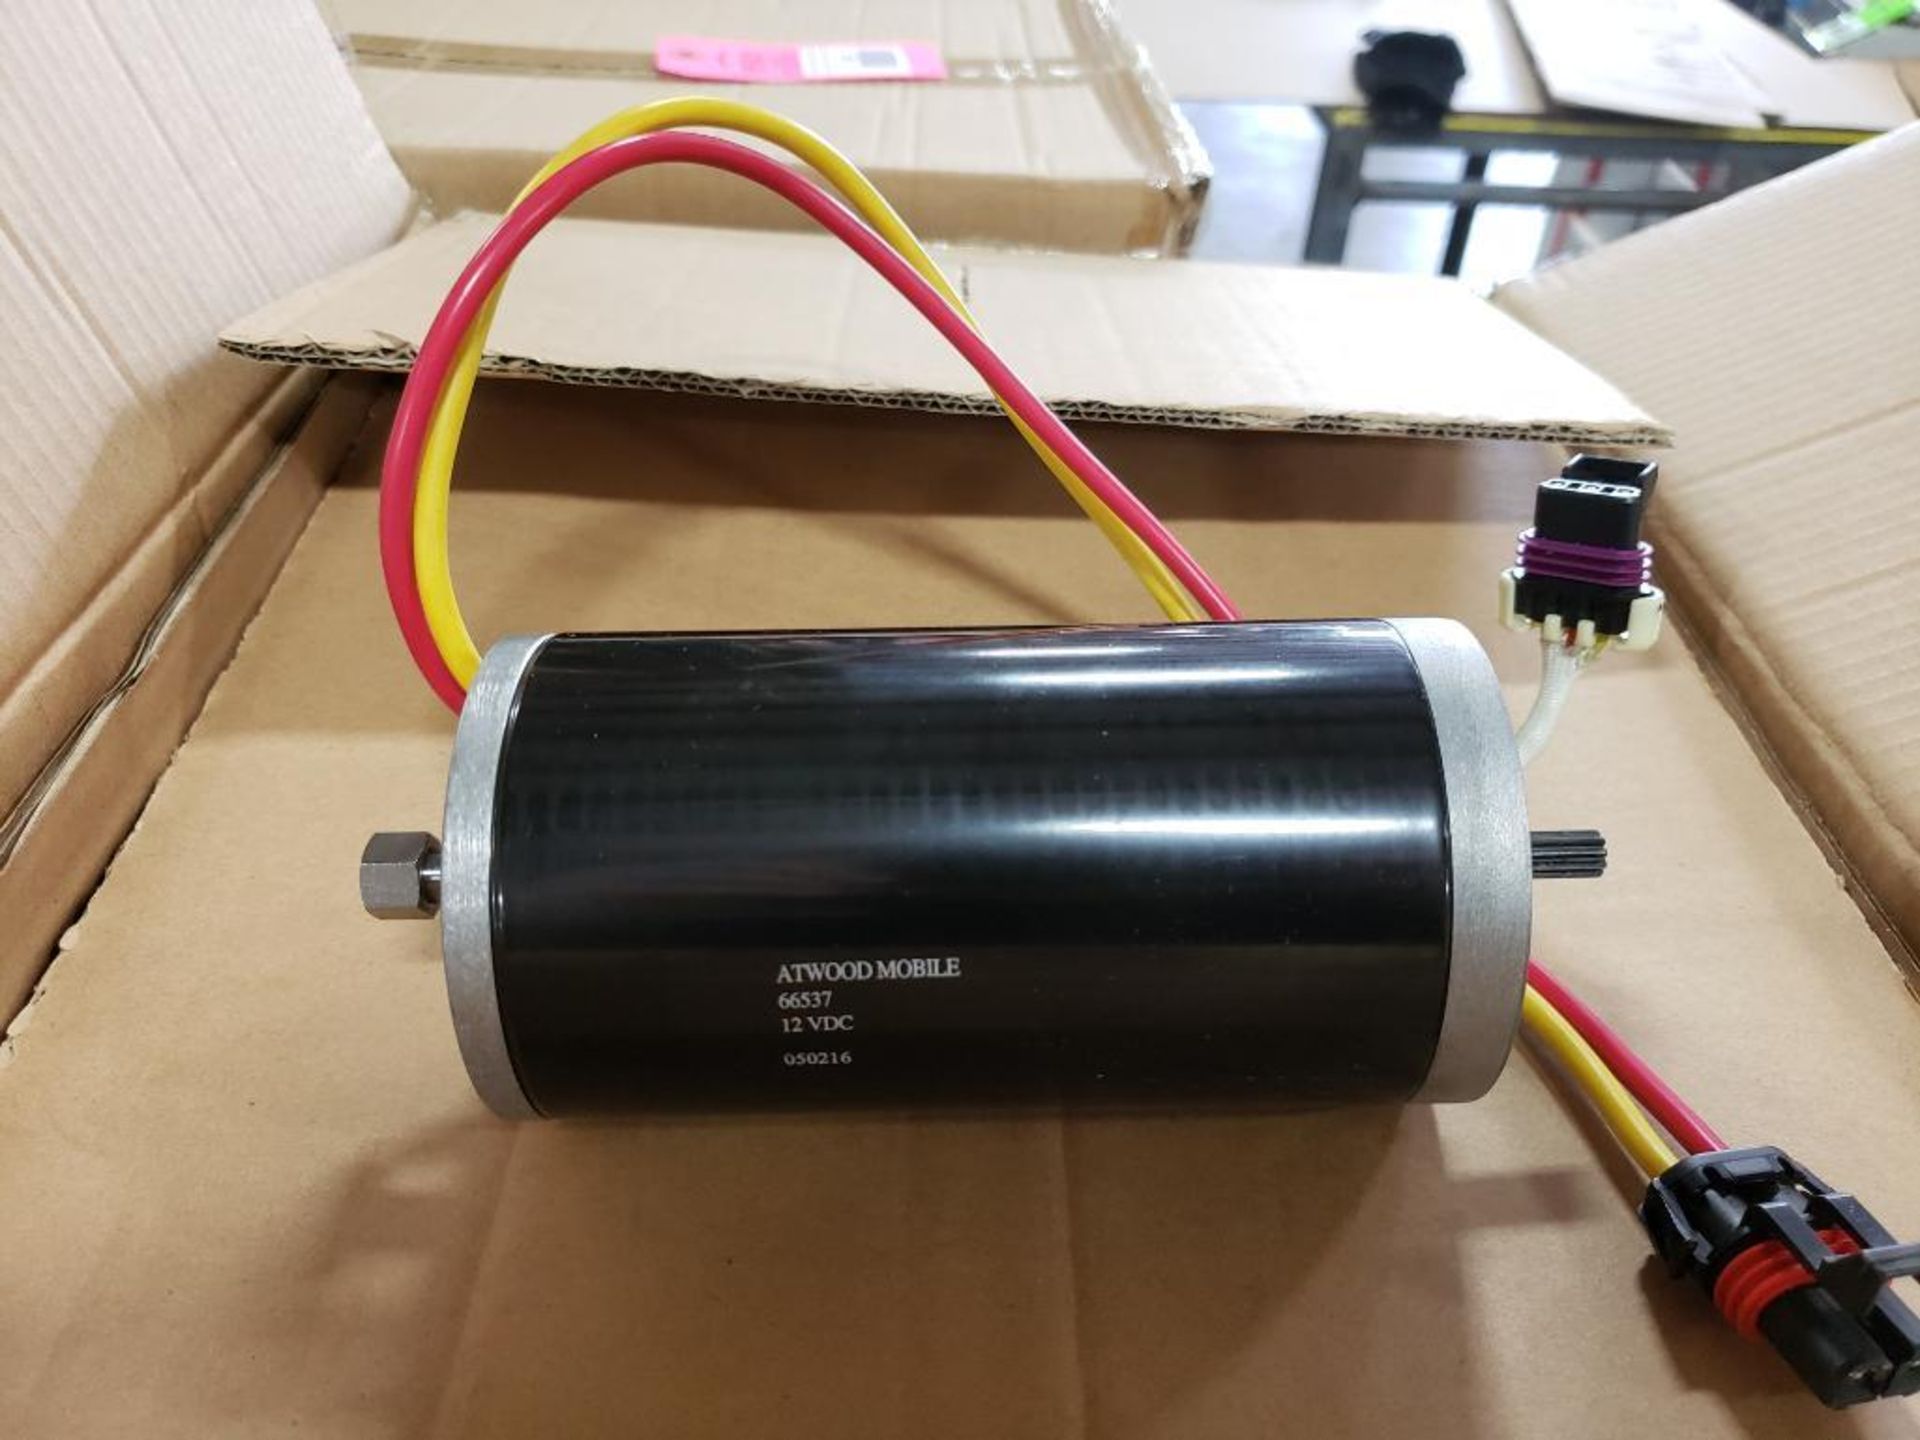 Qty 18 - Chiaphua components PM30R-60F-1004. Atwood Mobile 66537 12VDC Motors. New in box. - Image 3 of 4